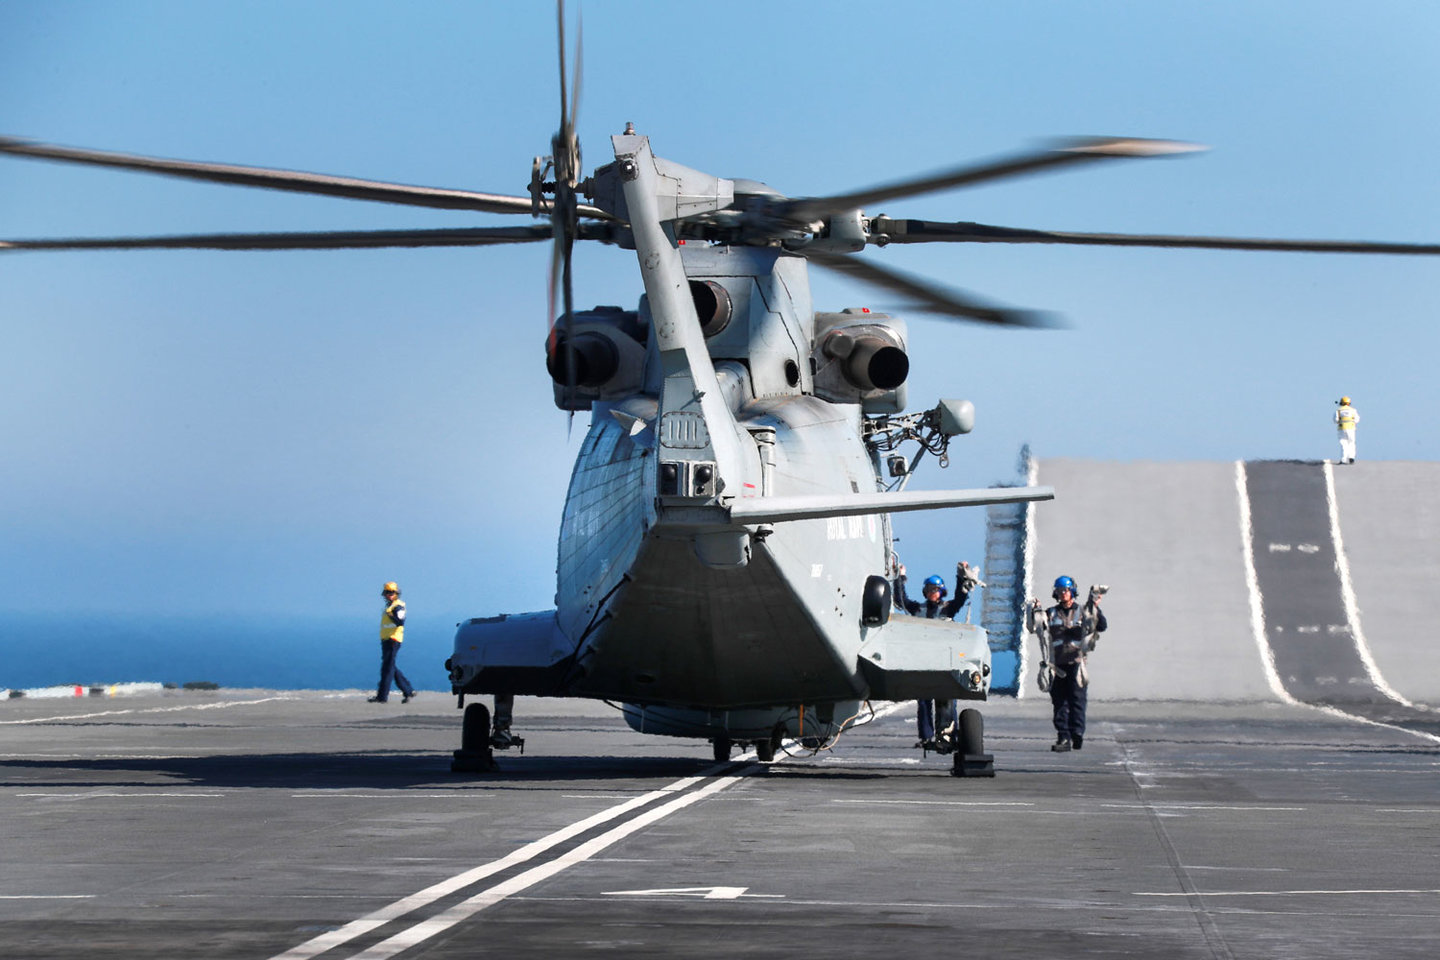 Merlin helicopters will make up the rotary-wing component of the carrier strike group.